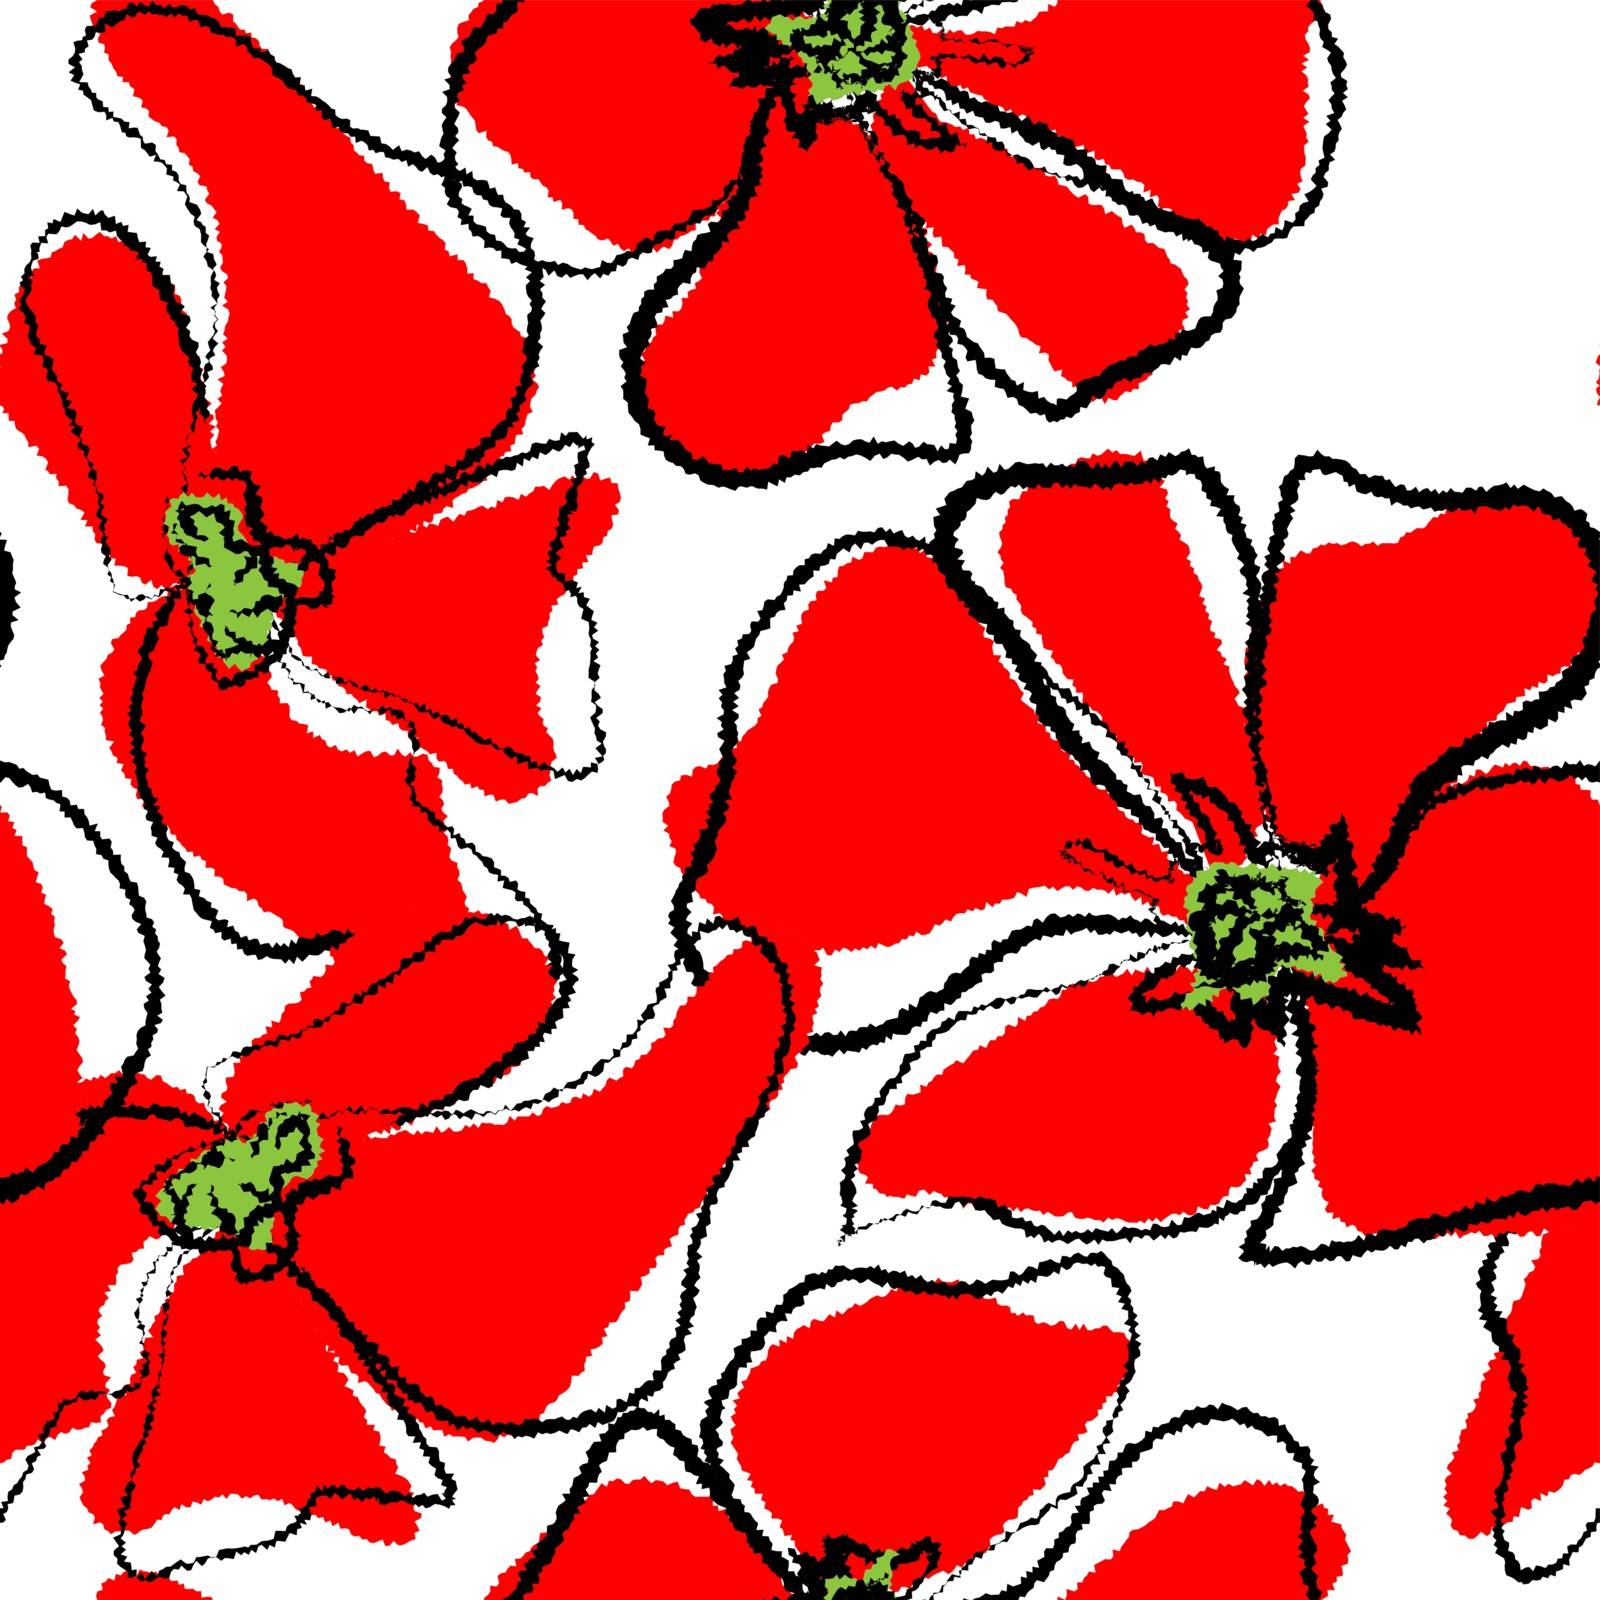 Poppies seamless in sketch style on seamless background. Wrapping paper. Colorful vector illustration. Wallpaper background. Decorative floral pattern.